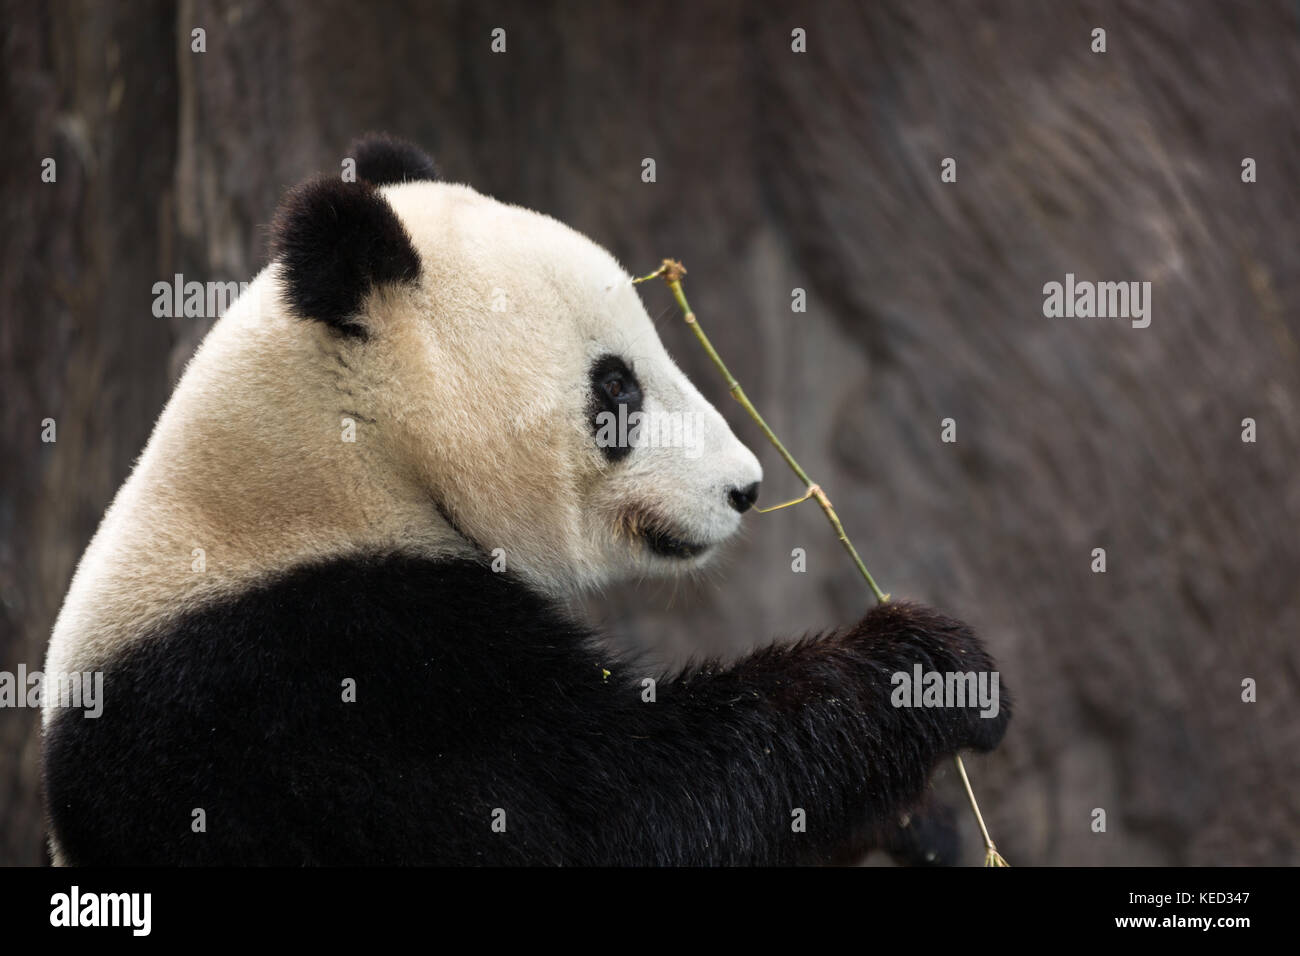 Panda eating bamboo isolated with blurred background Stock Photo